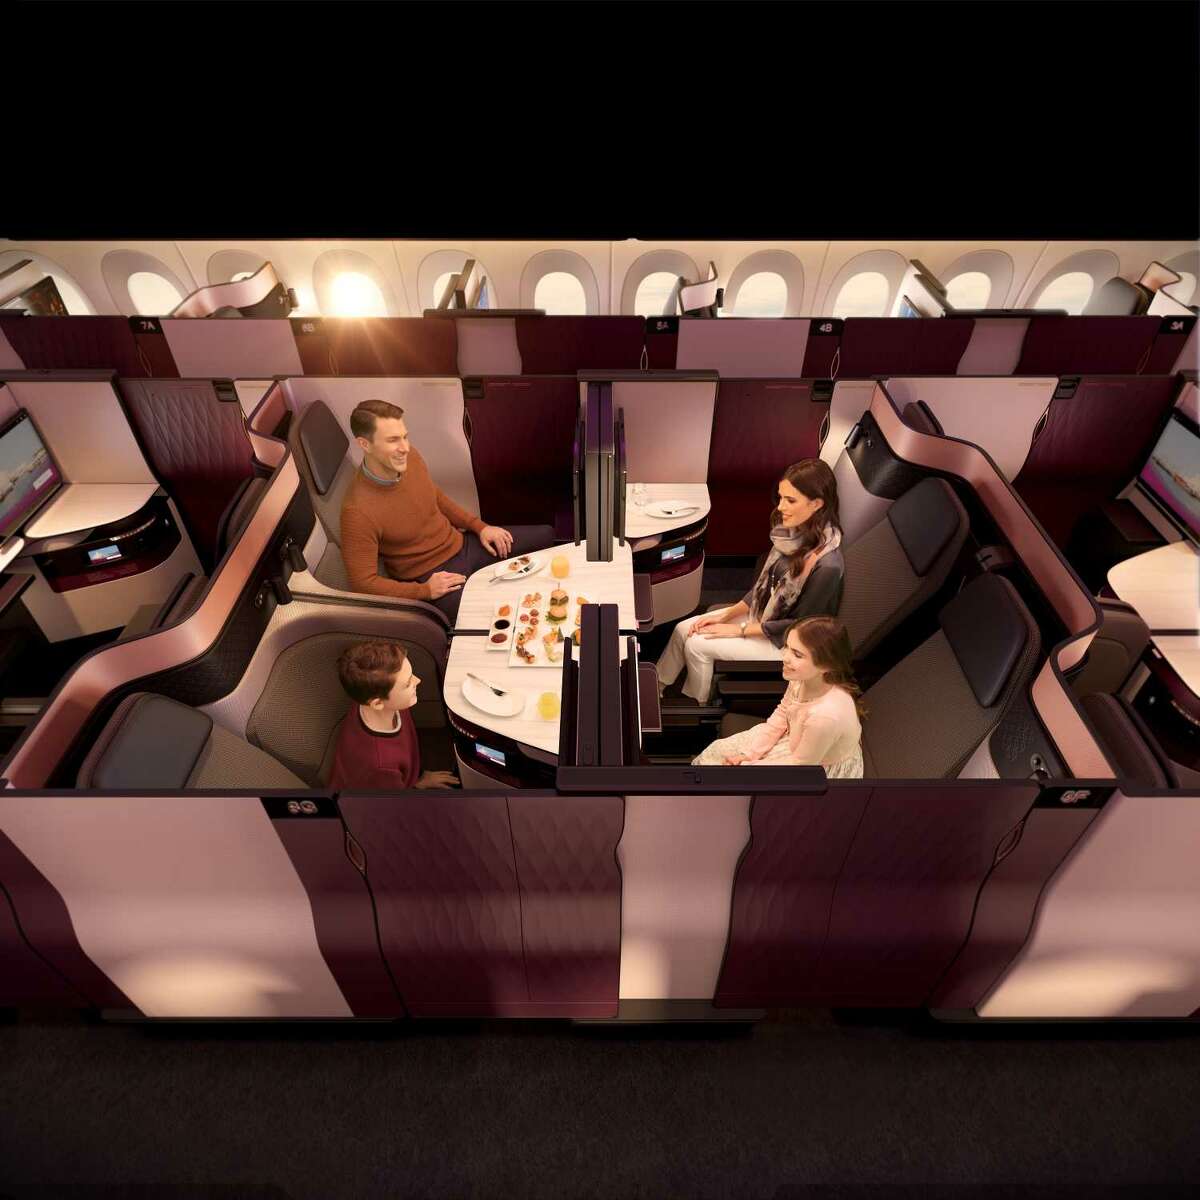 Qatar Airways' Qsuite business class is available on flights between Houston and Doha, Qatar.